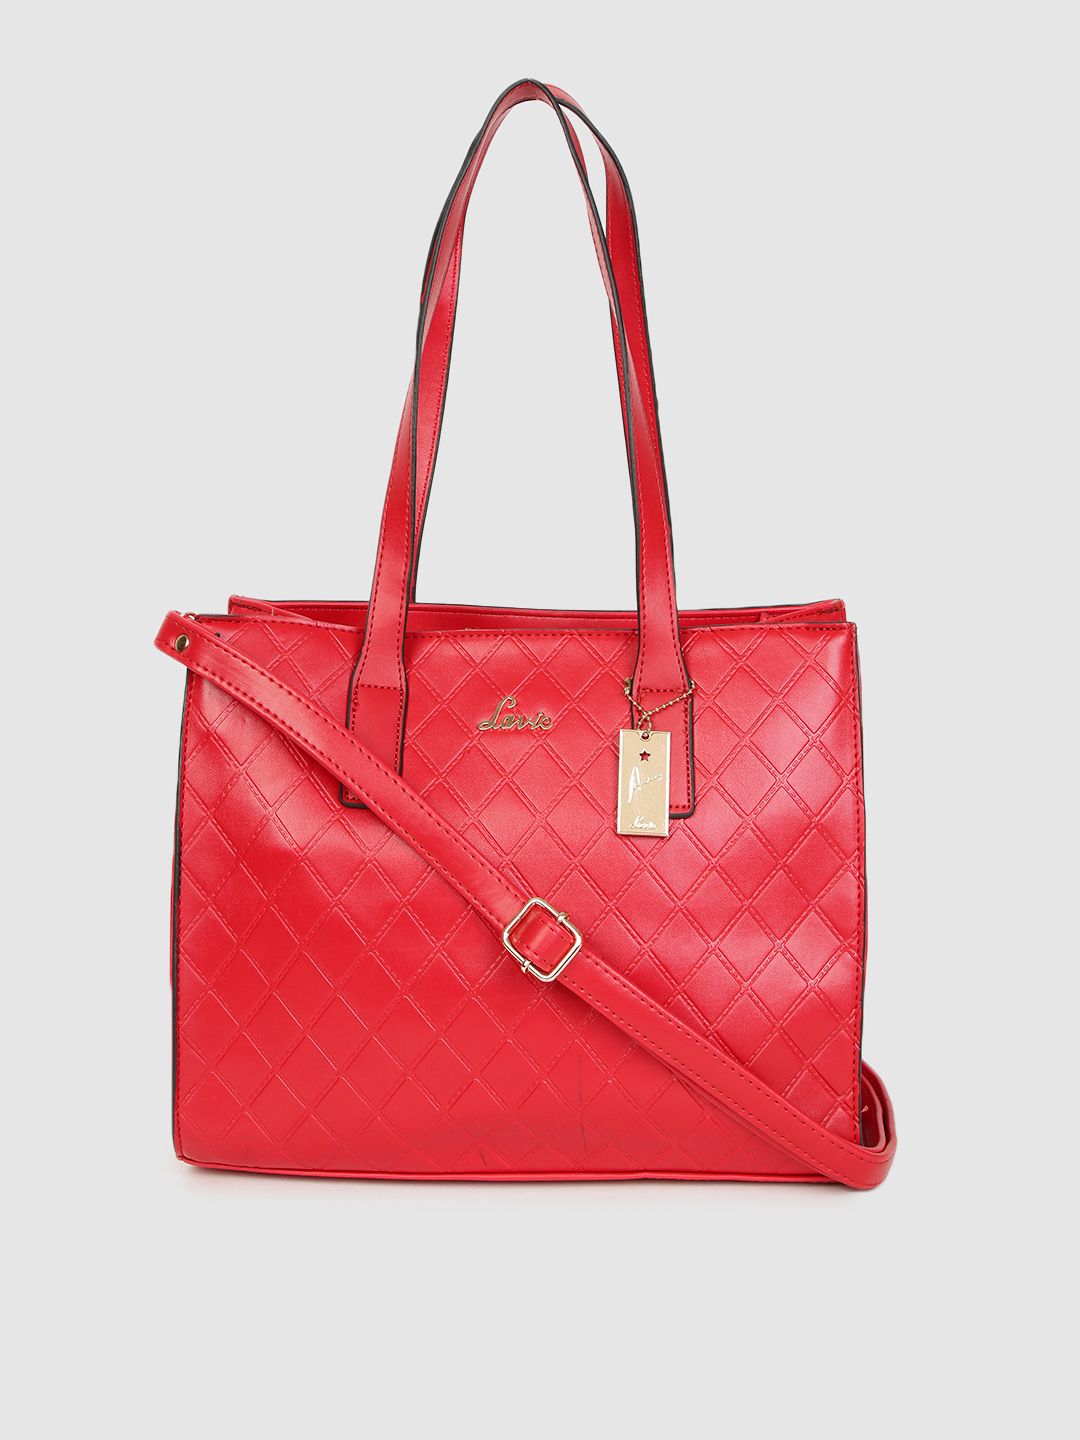 Lavie Red Quilted Textured VEX Shoulder Bag Price in India